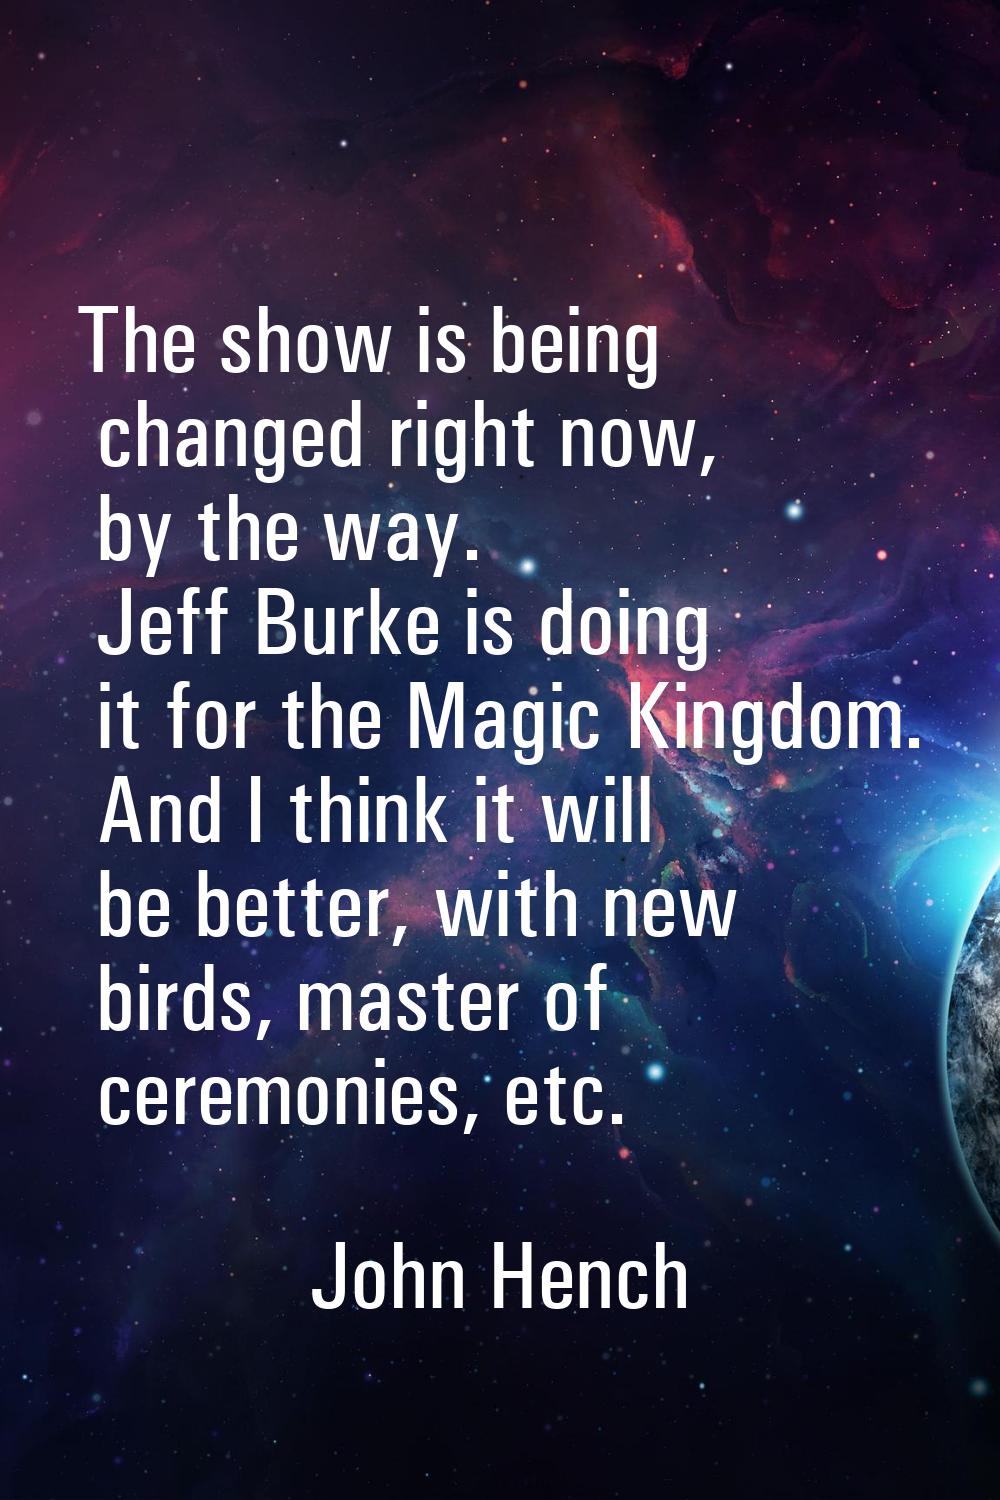 The show is being changed right now, by the way. Jeff Burke is doing it for the Magic Kingdom. And 